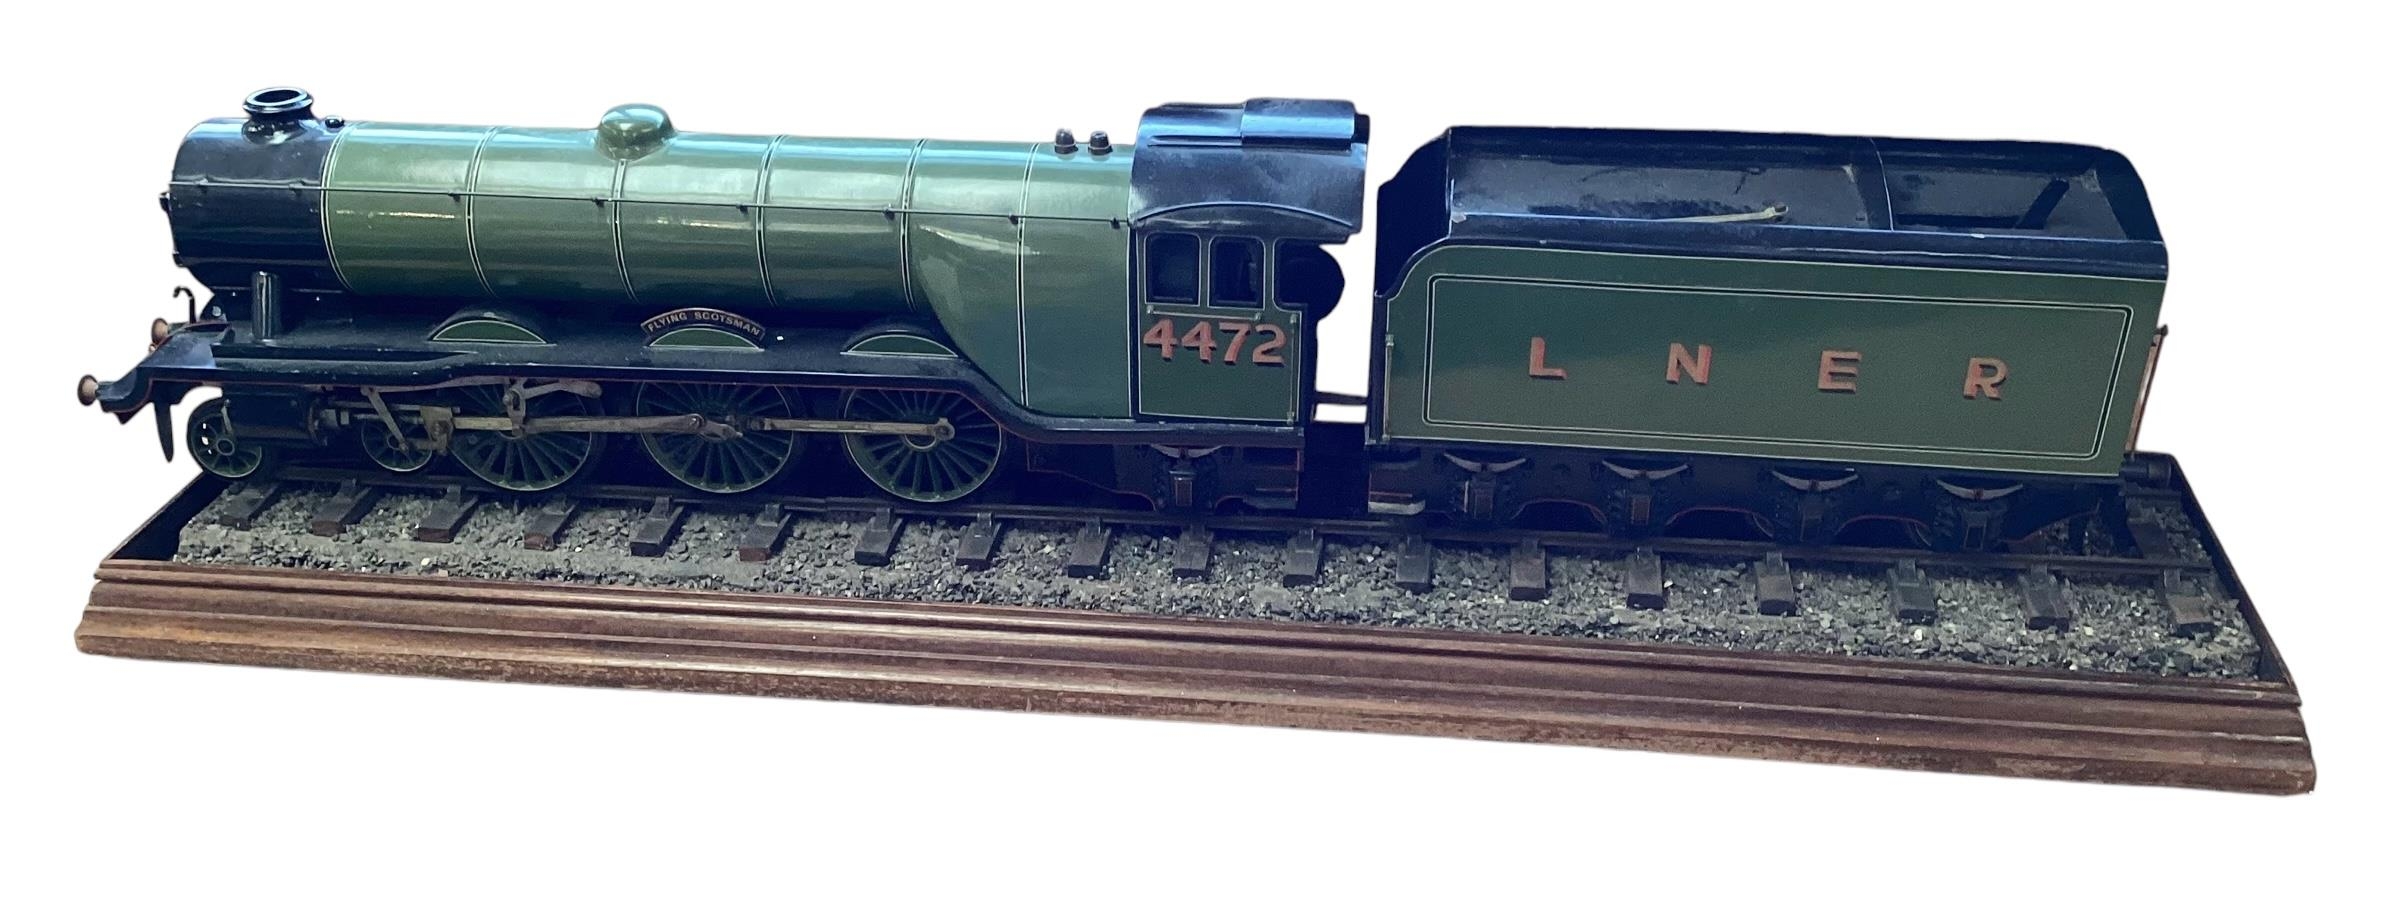 A large Desk top model of The Flying Scotsman Train. 4472 on a naturalistic track base with matching